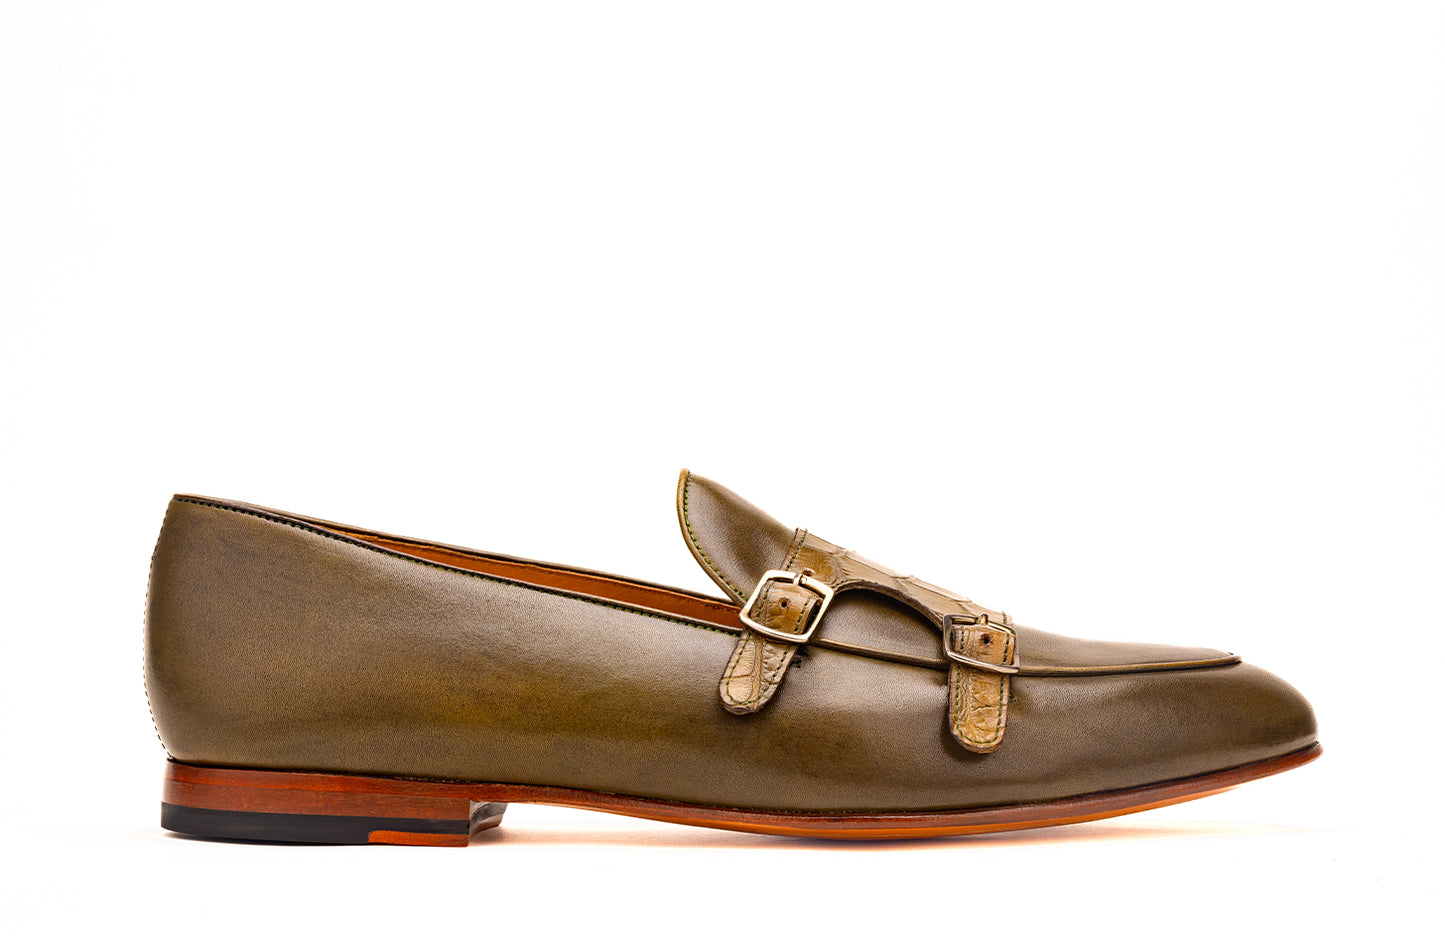 Doublemonk loafer with Croc embossed straps